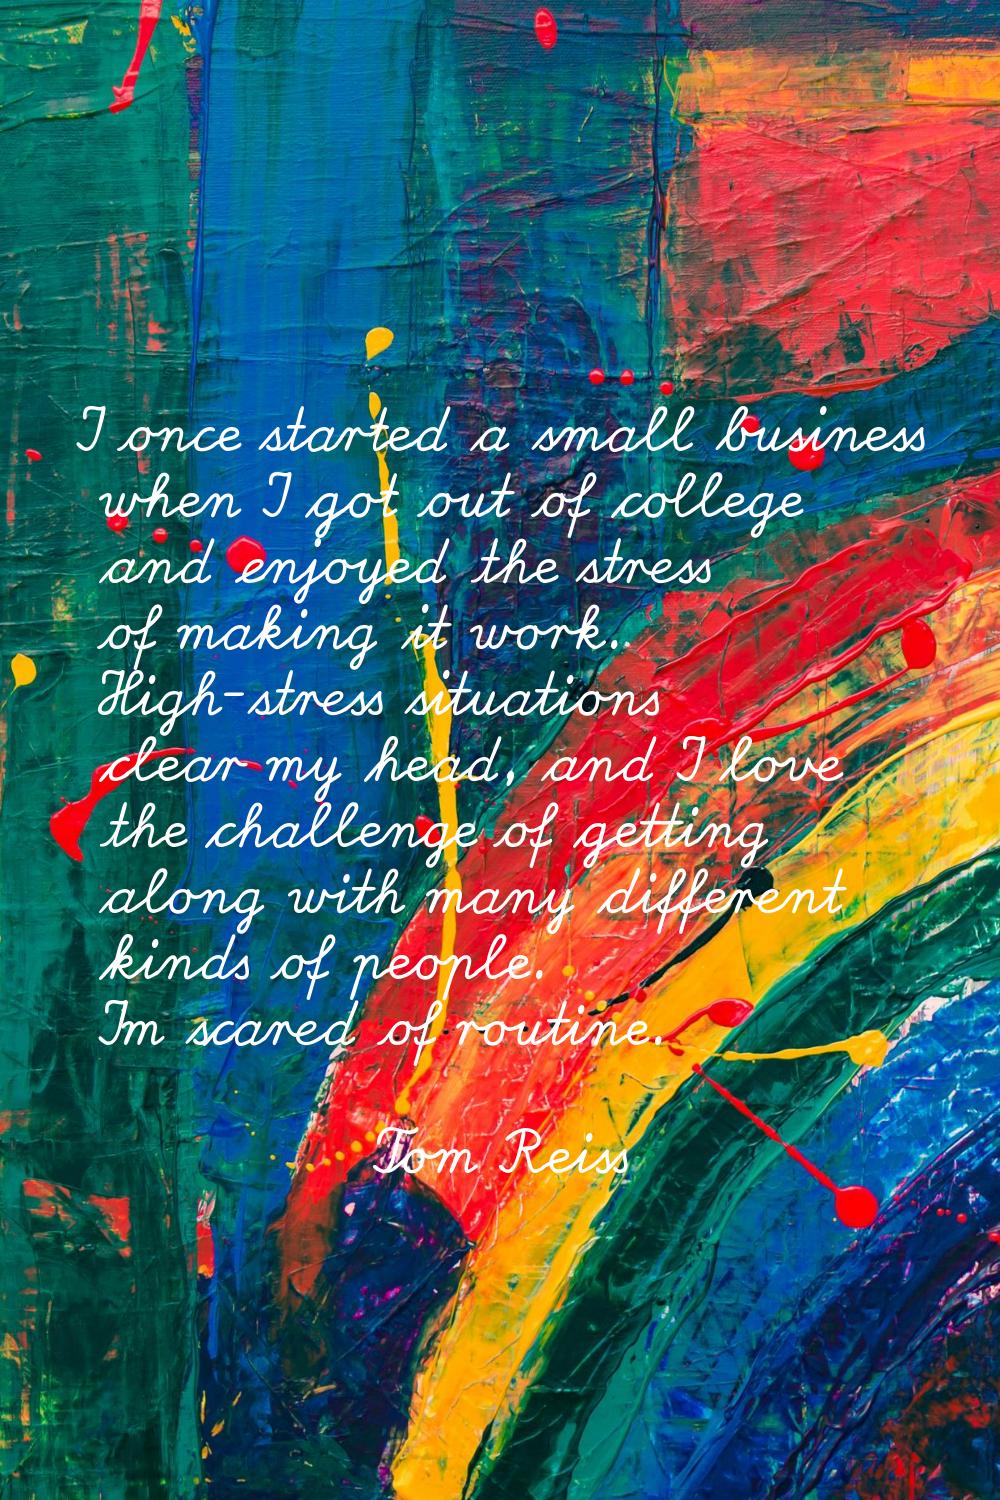 I once started a small business when I got out of college and enjoyed the stress of making it work.